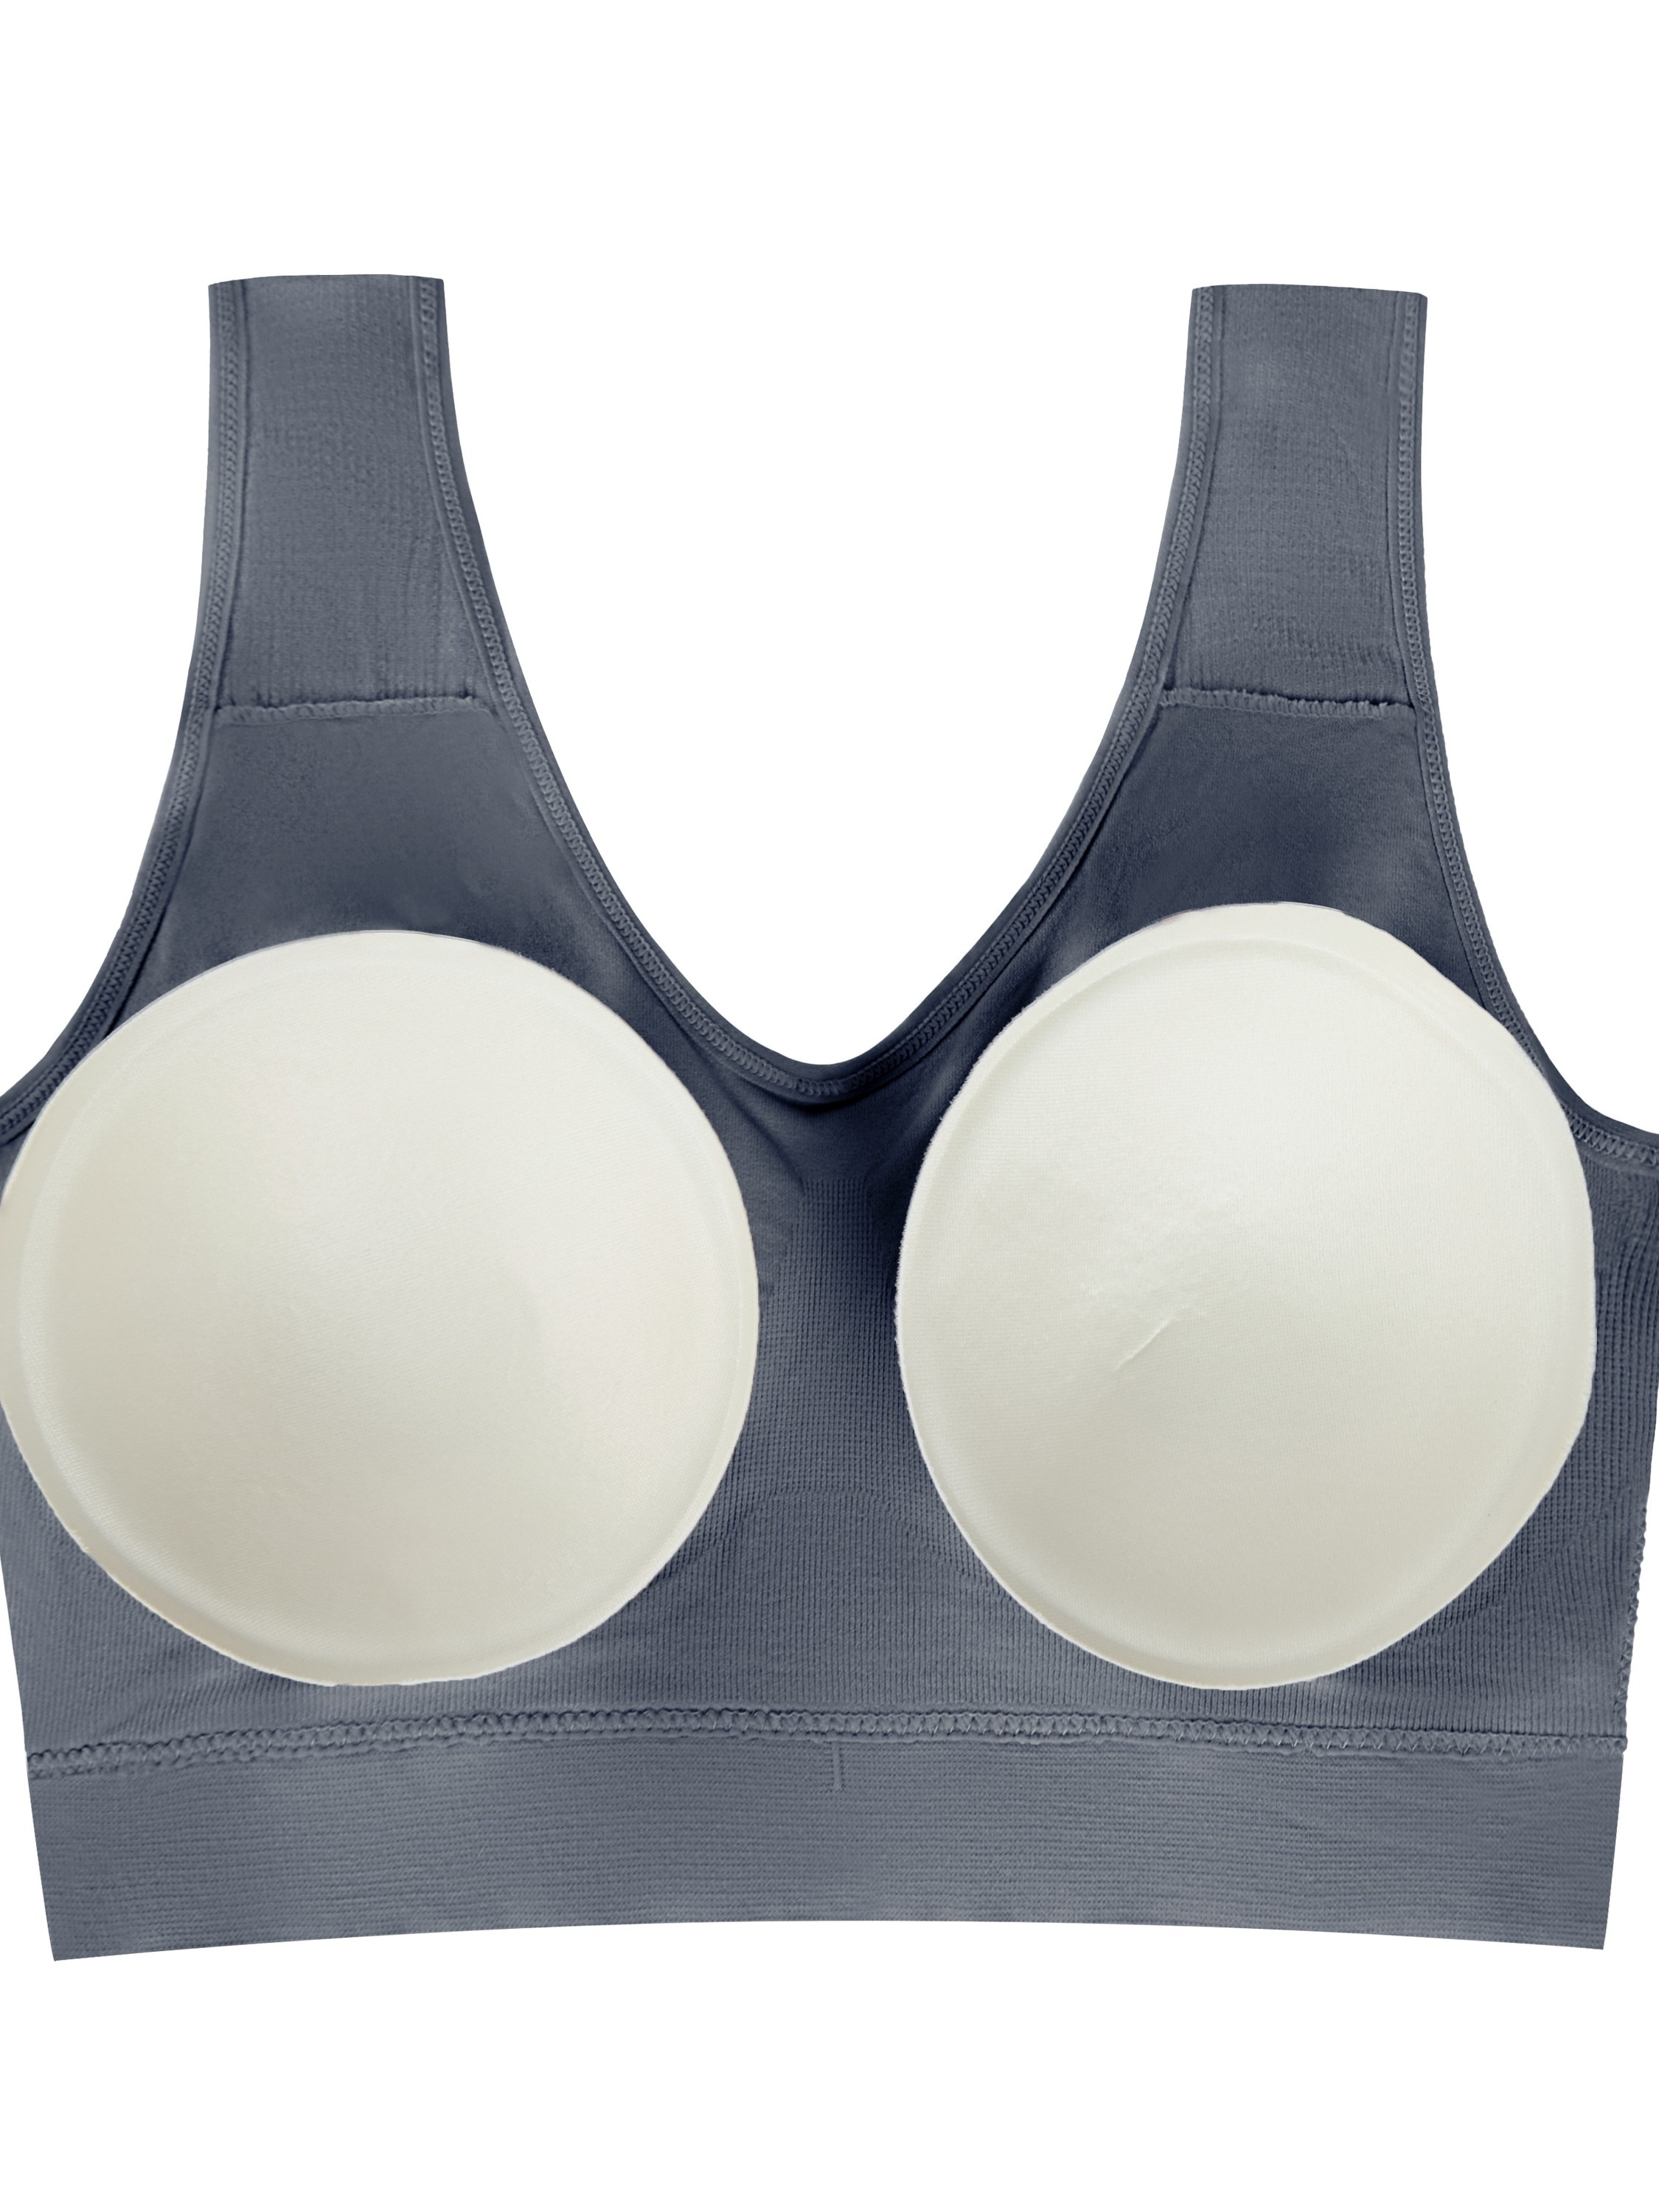 Samickarr Clearance items!Plus Size Seamless Sports Bra For Women